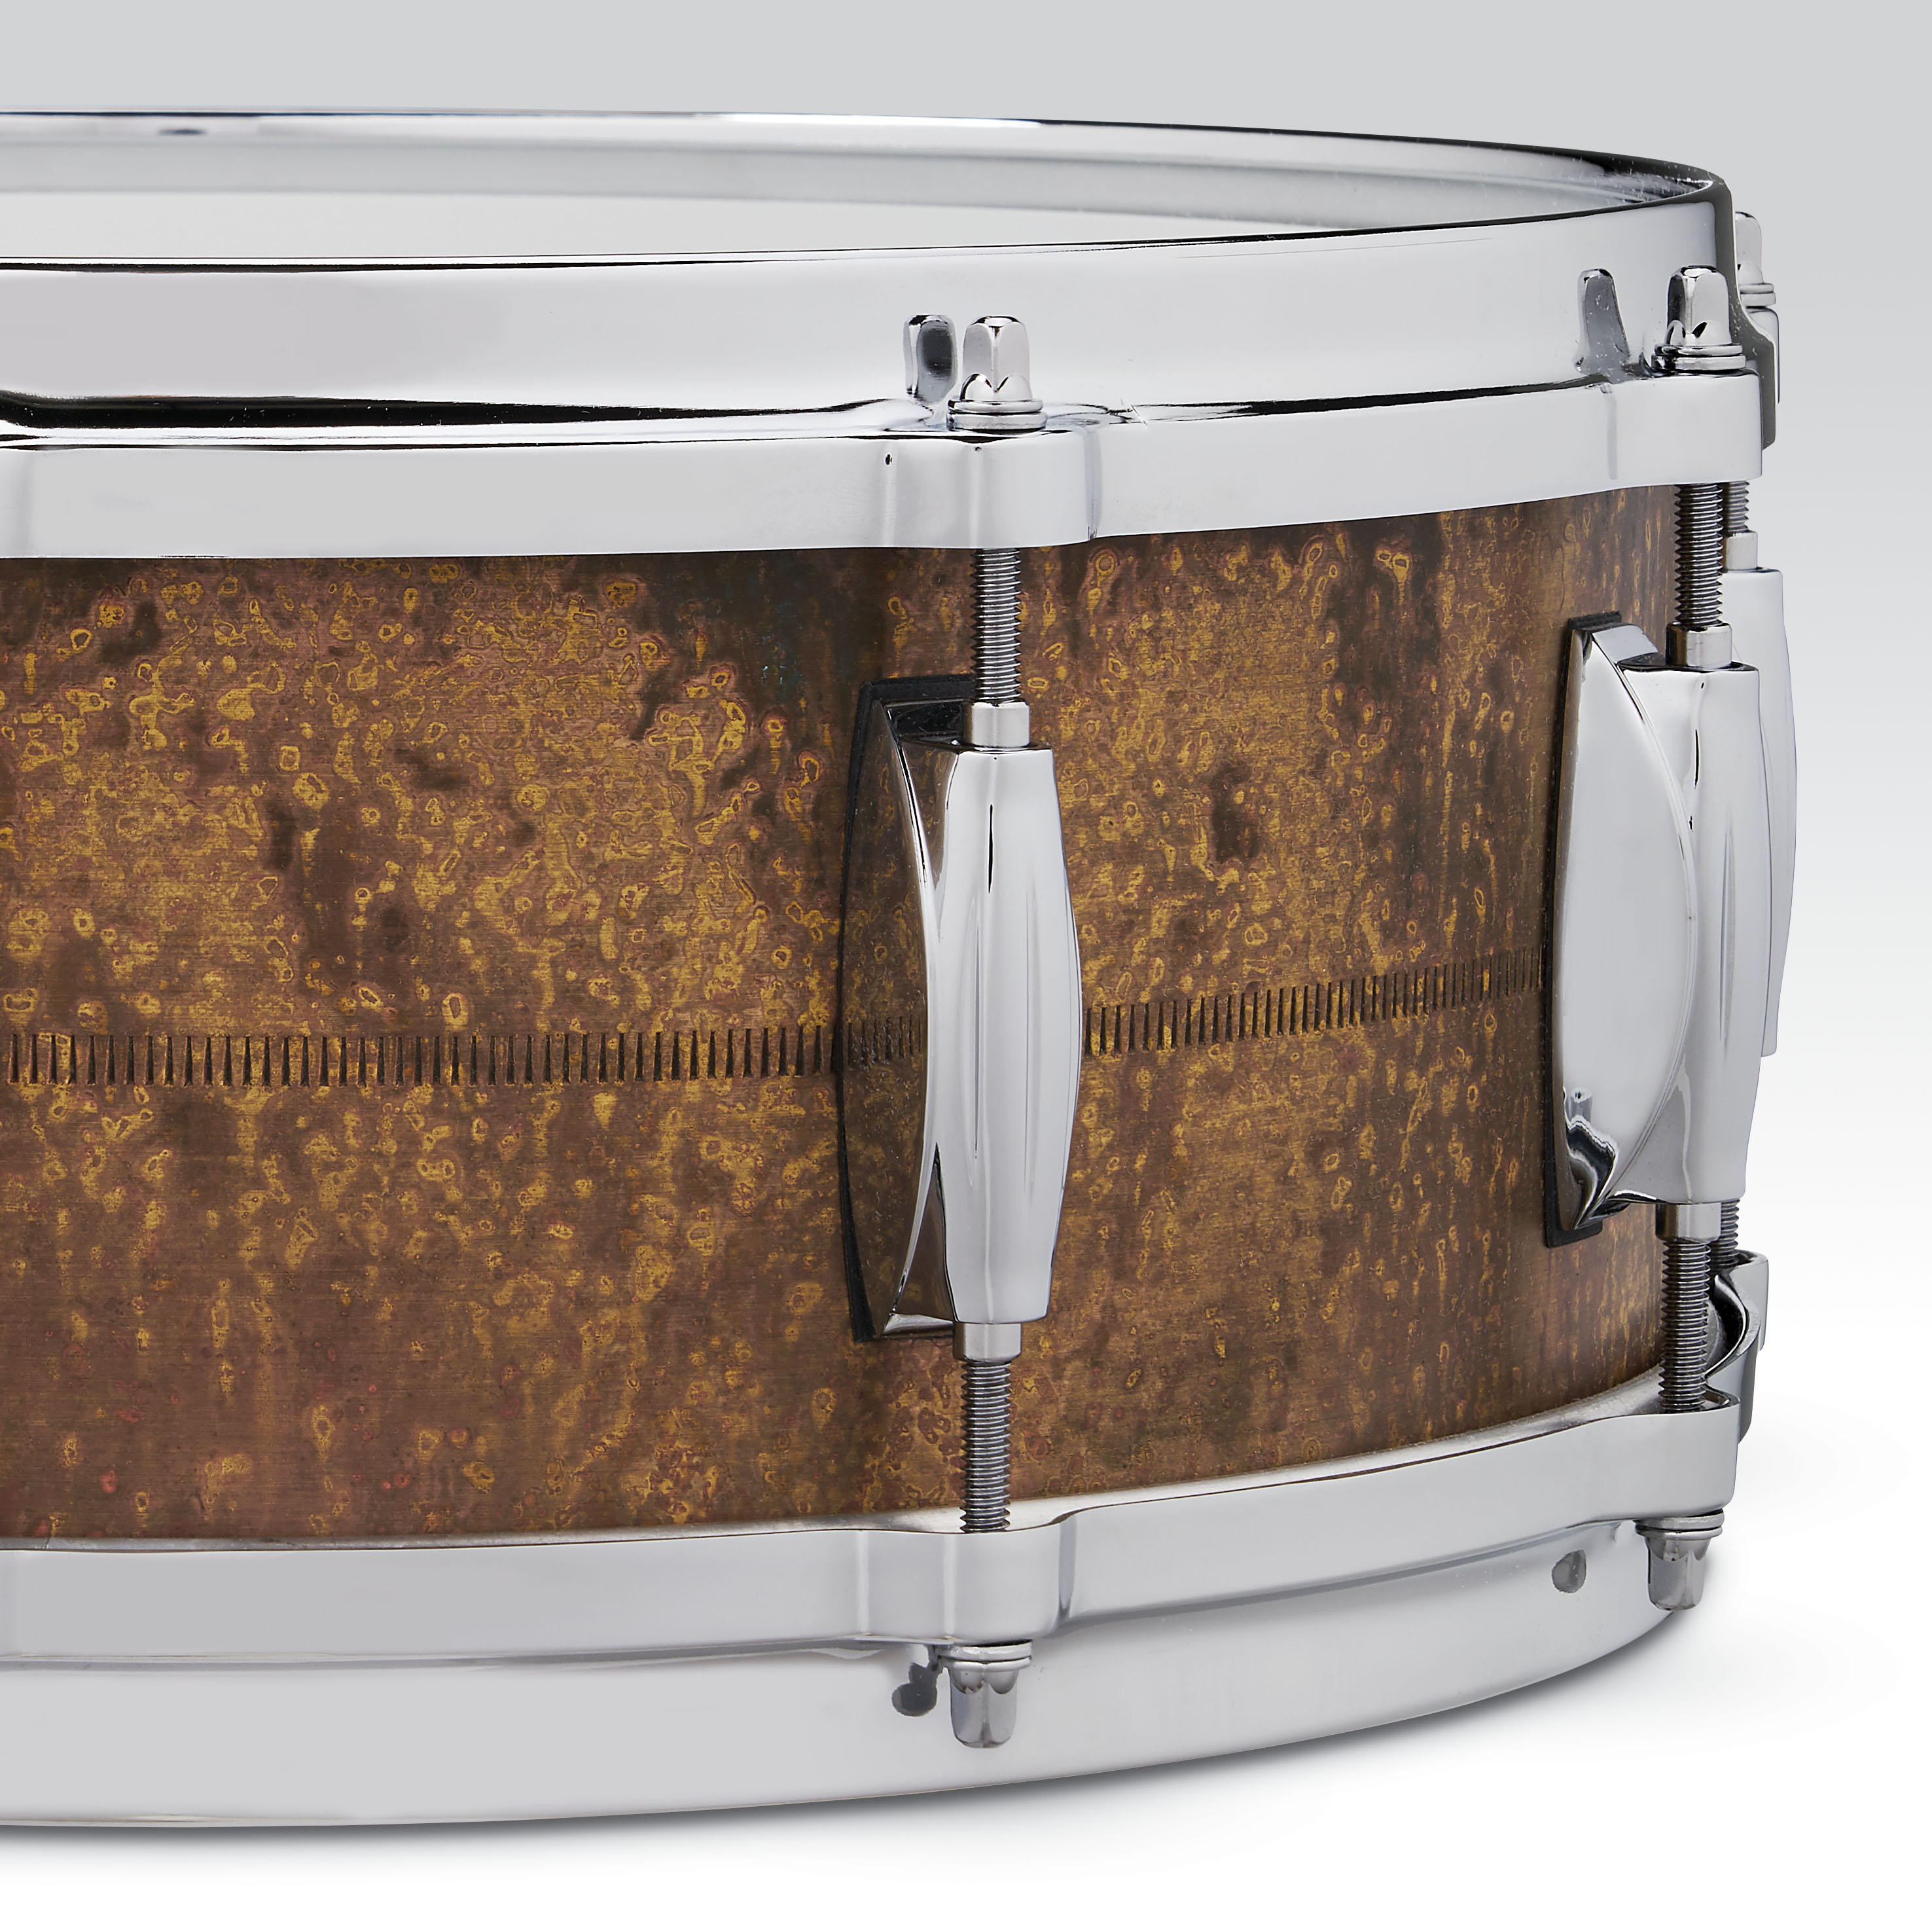 Gretsch Introduces The Keith Carlock Signature Snare Drum